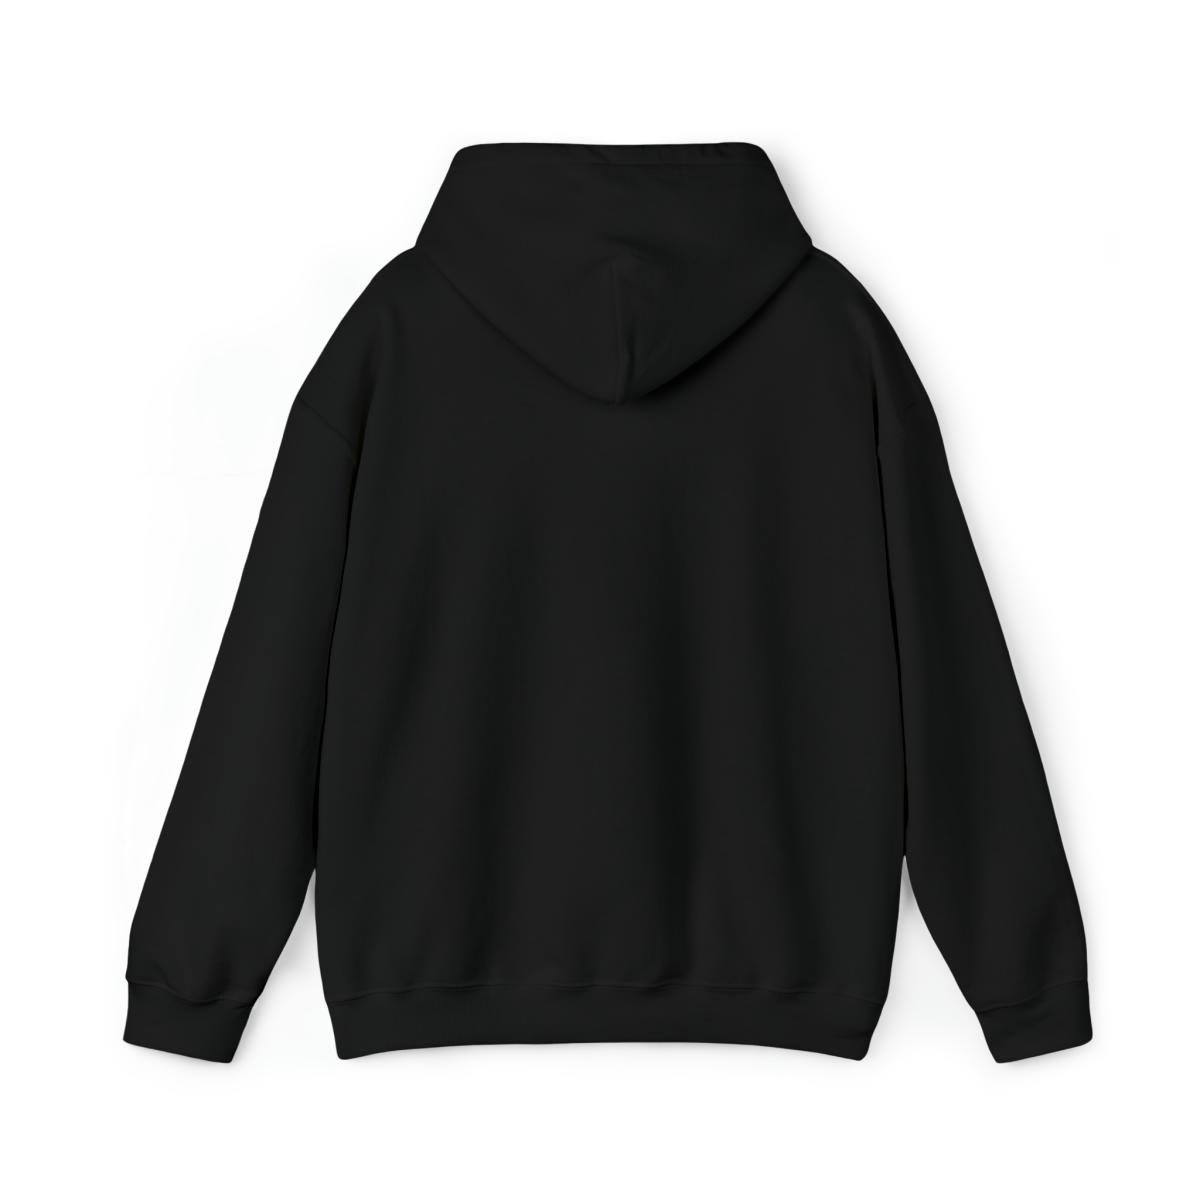 Scapegoat – Solemnity Pullover Hooded Sweatshirt